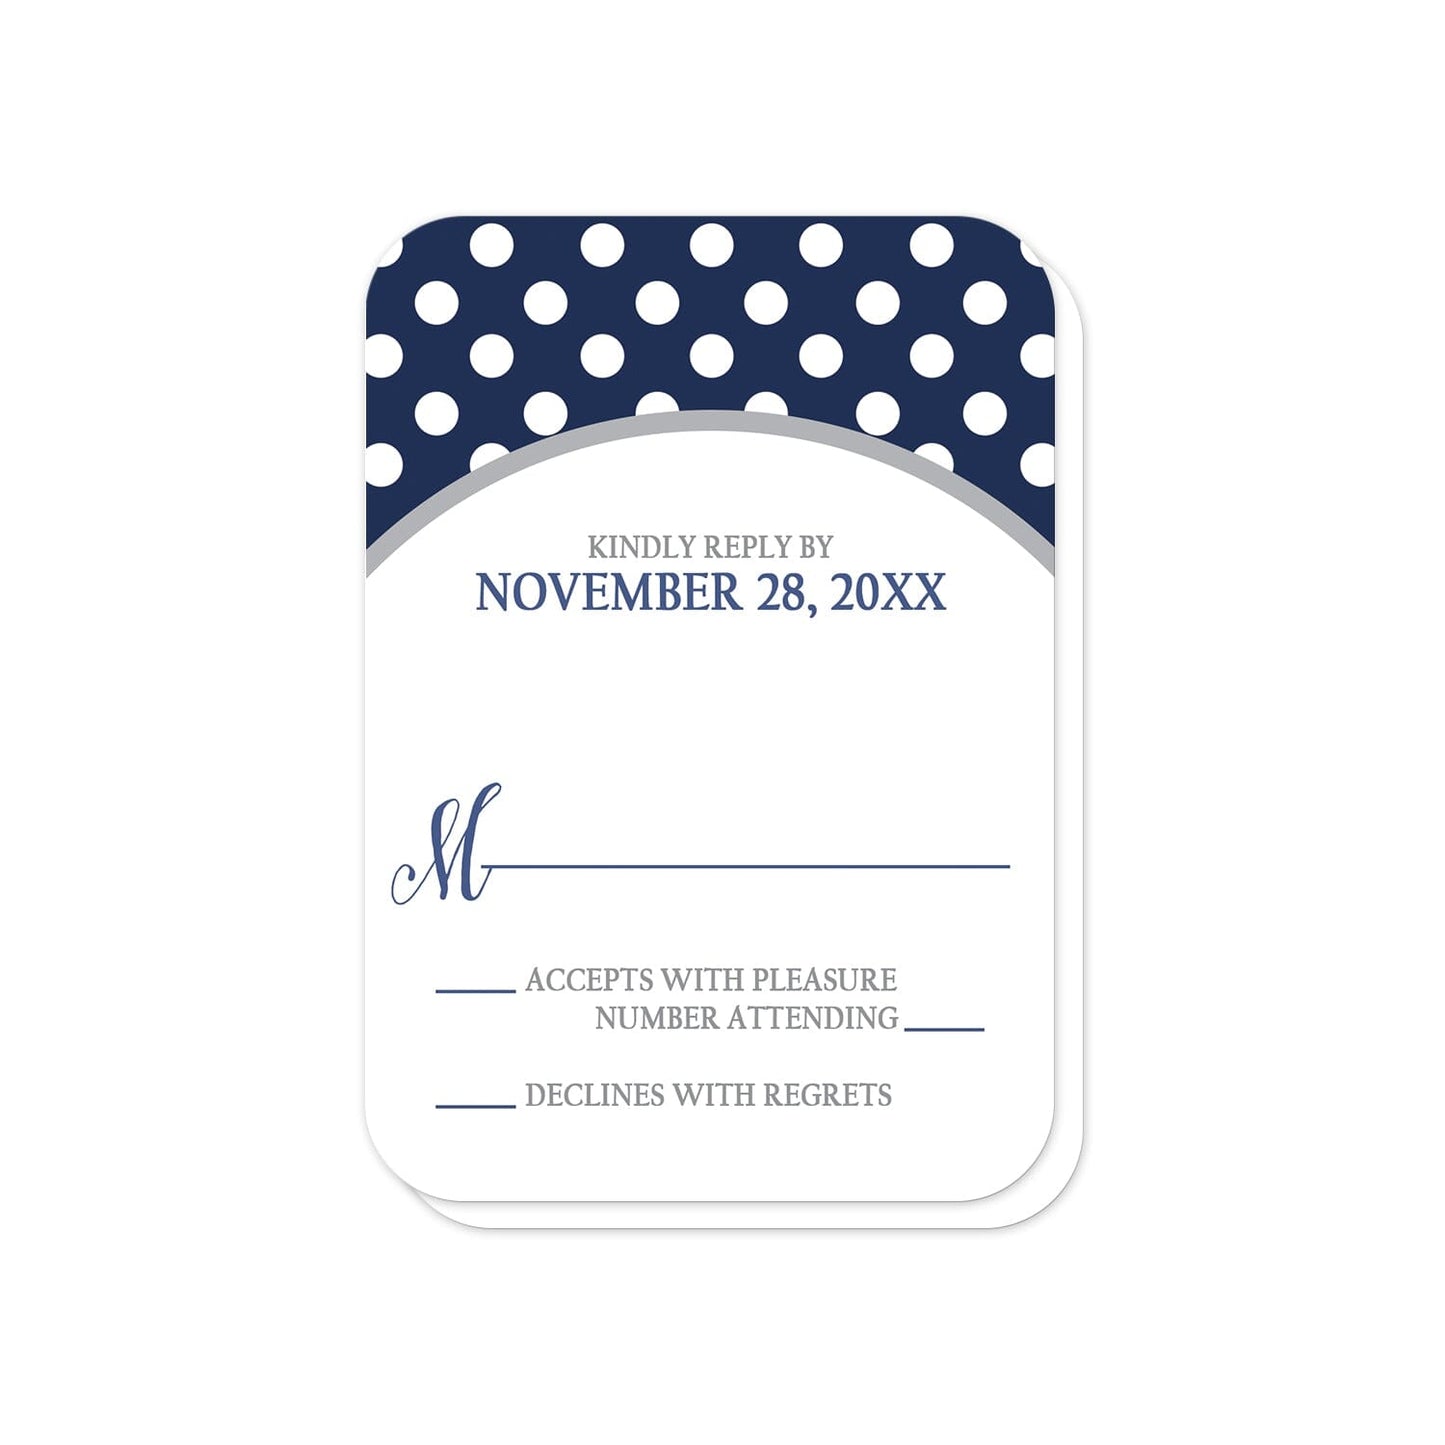 Gray Navy Blue Polka Dot RSVP Cards (with rounded corners) at Artistically Invited.